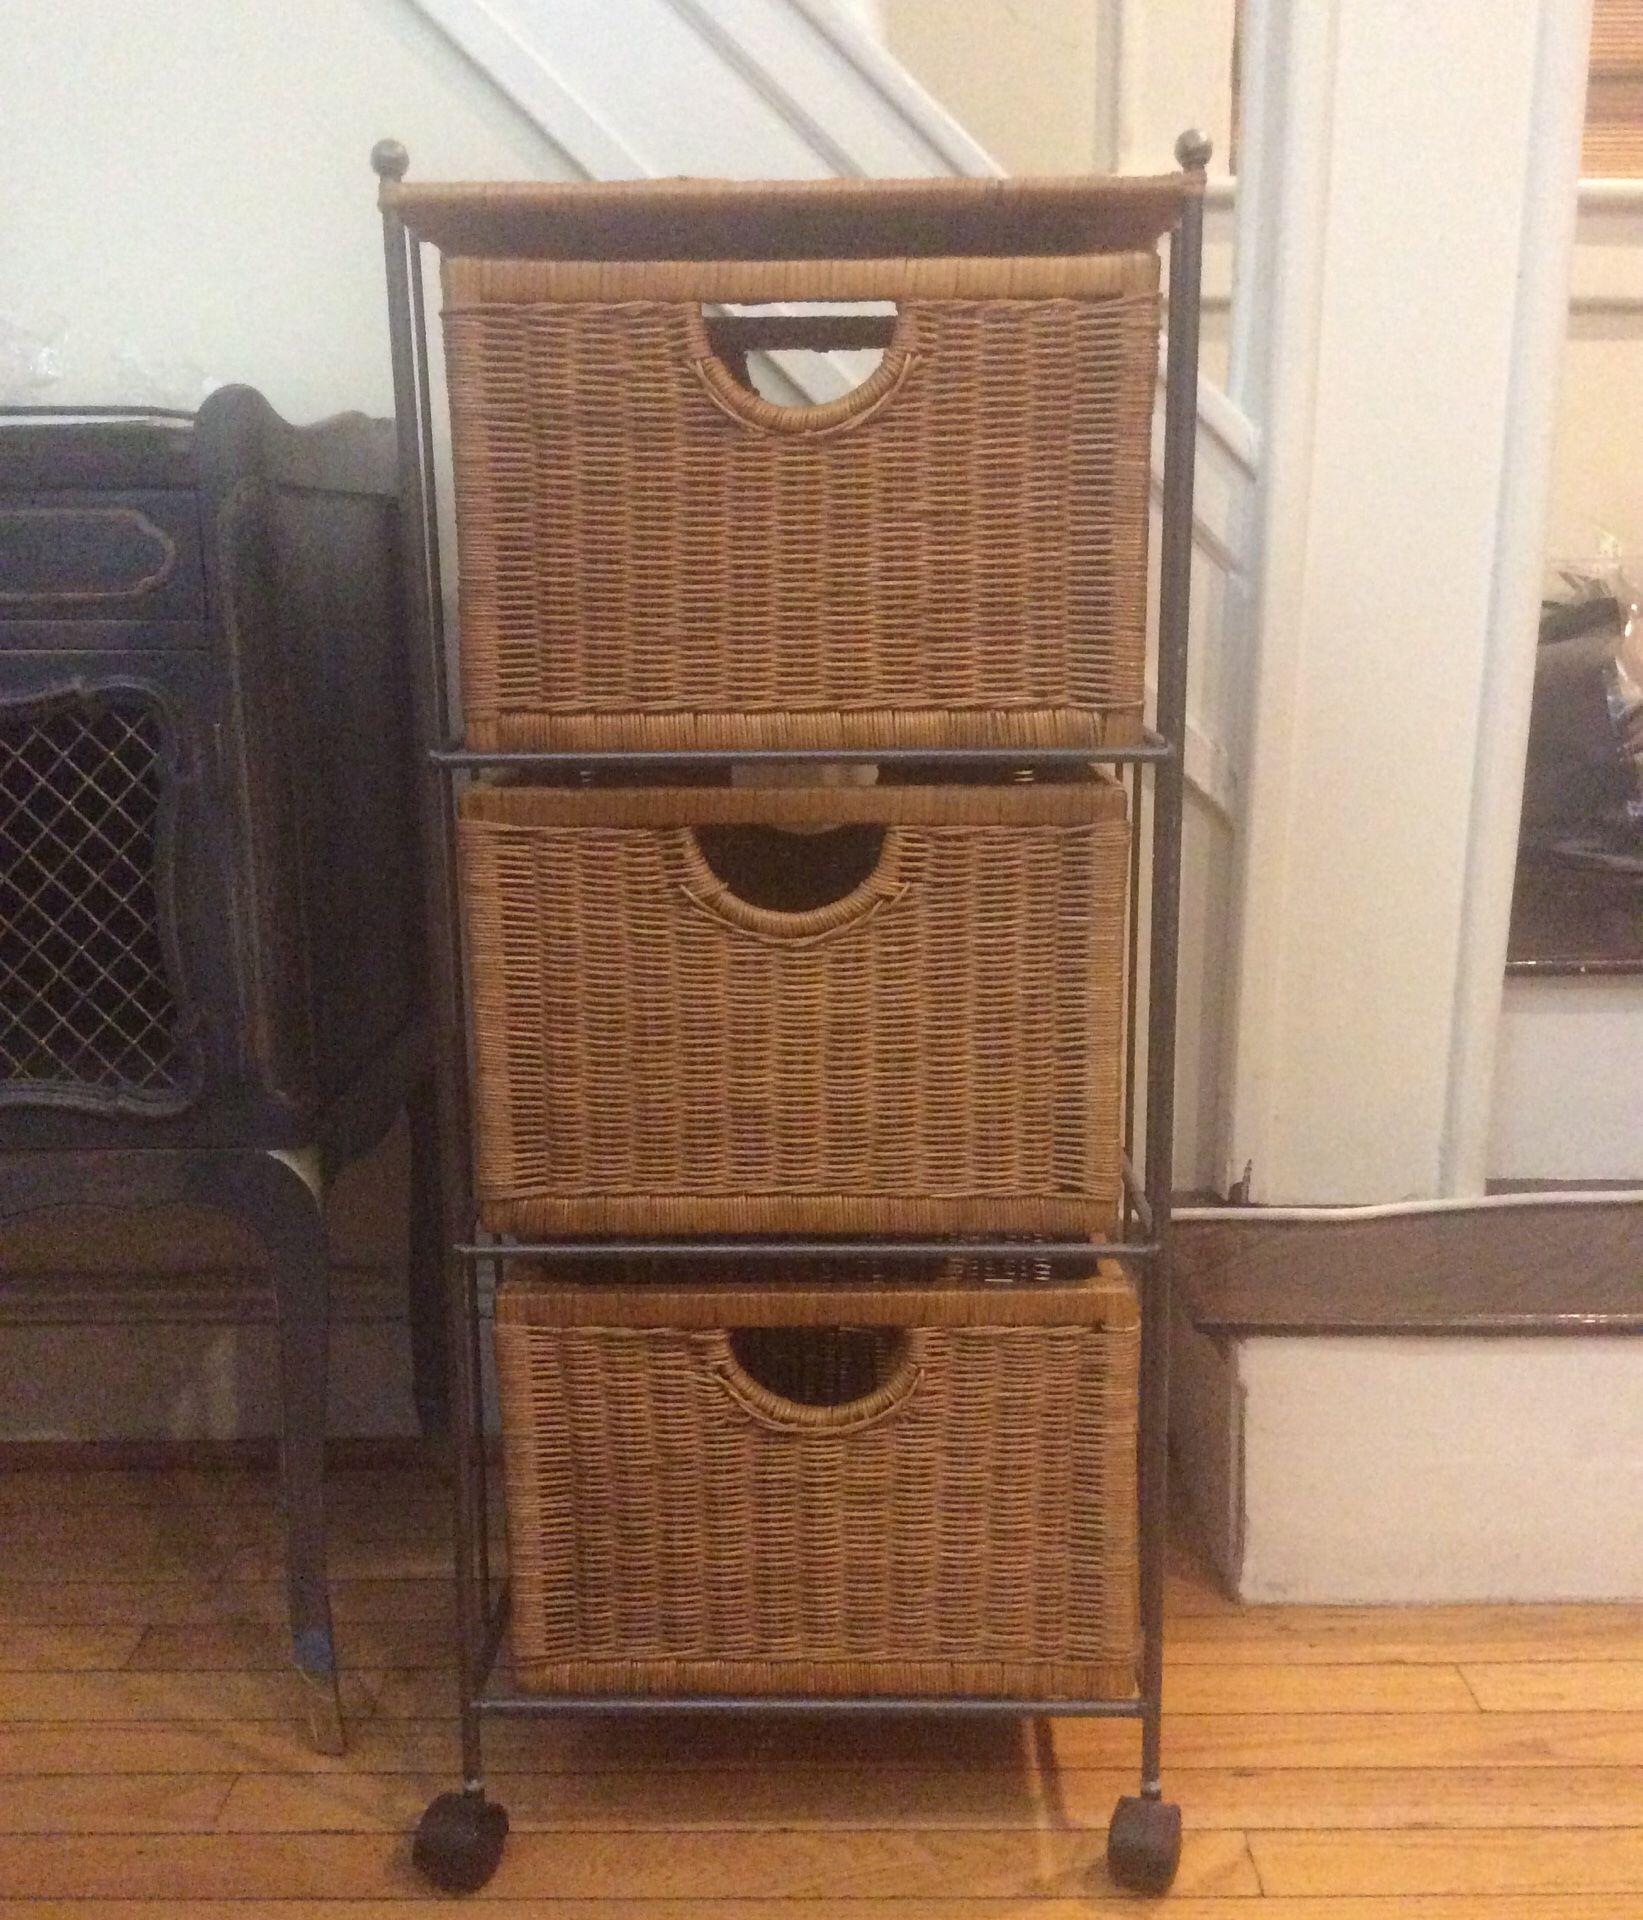 Pier 1 wrought iron and wicker 3 drawer storage with wheels